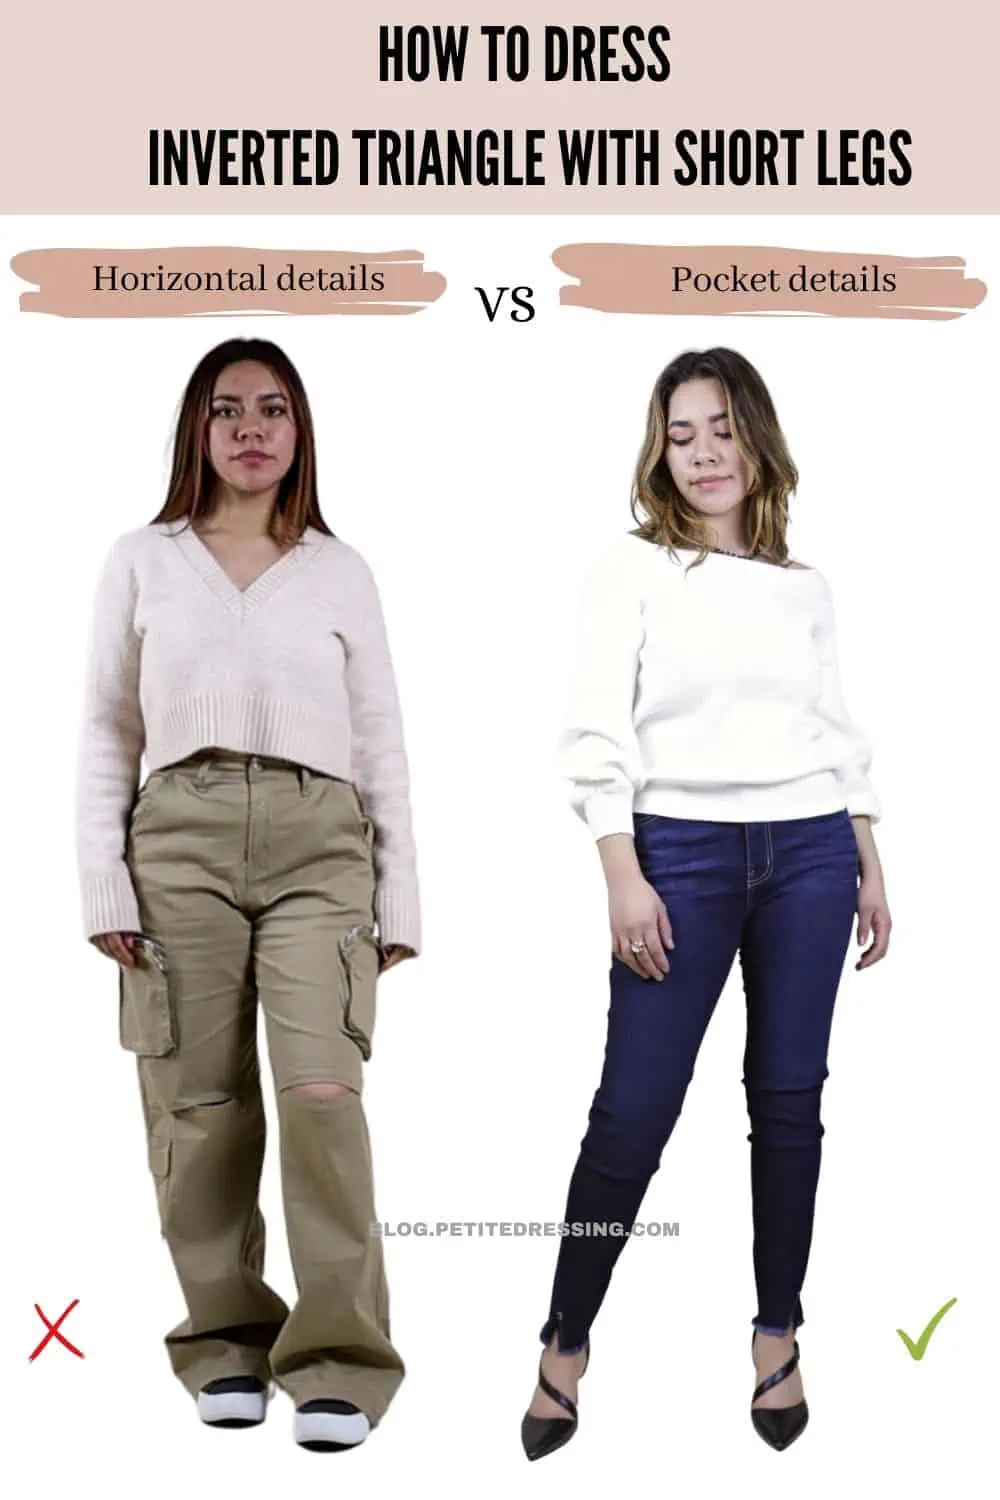 How to dress inverted triangle with short legs - Petite Dressing